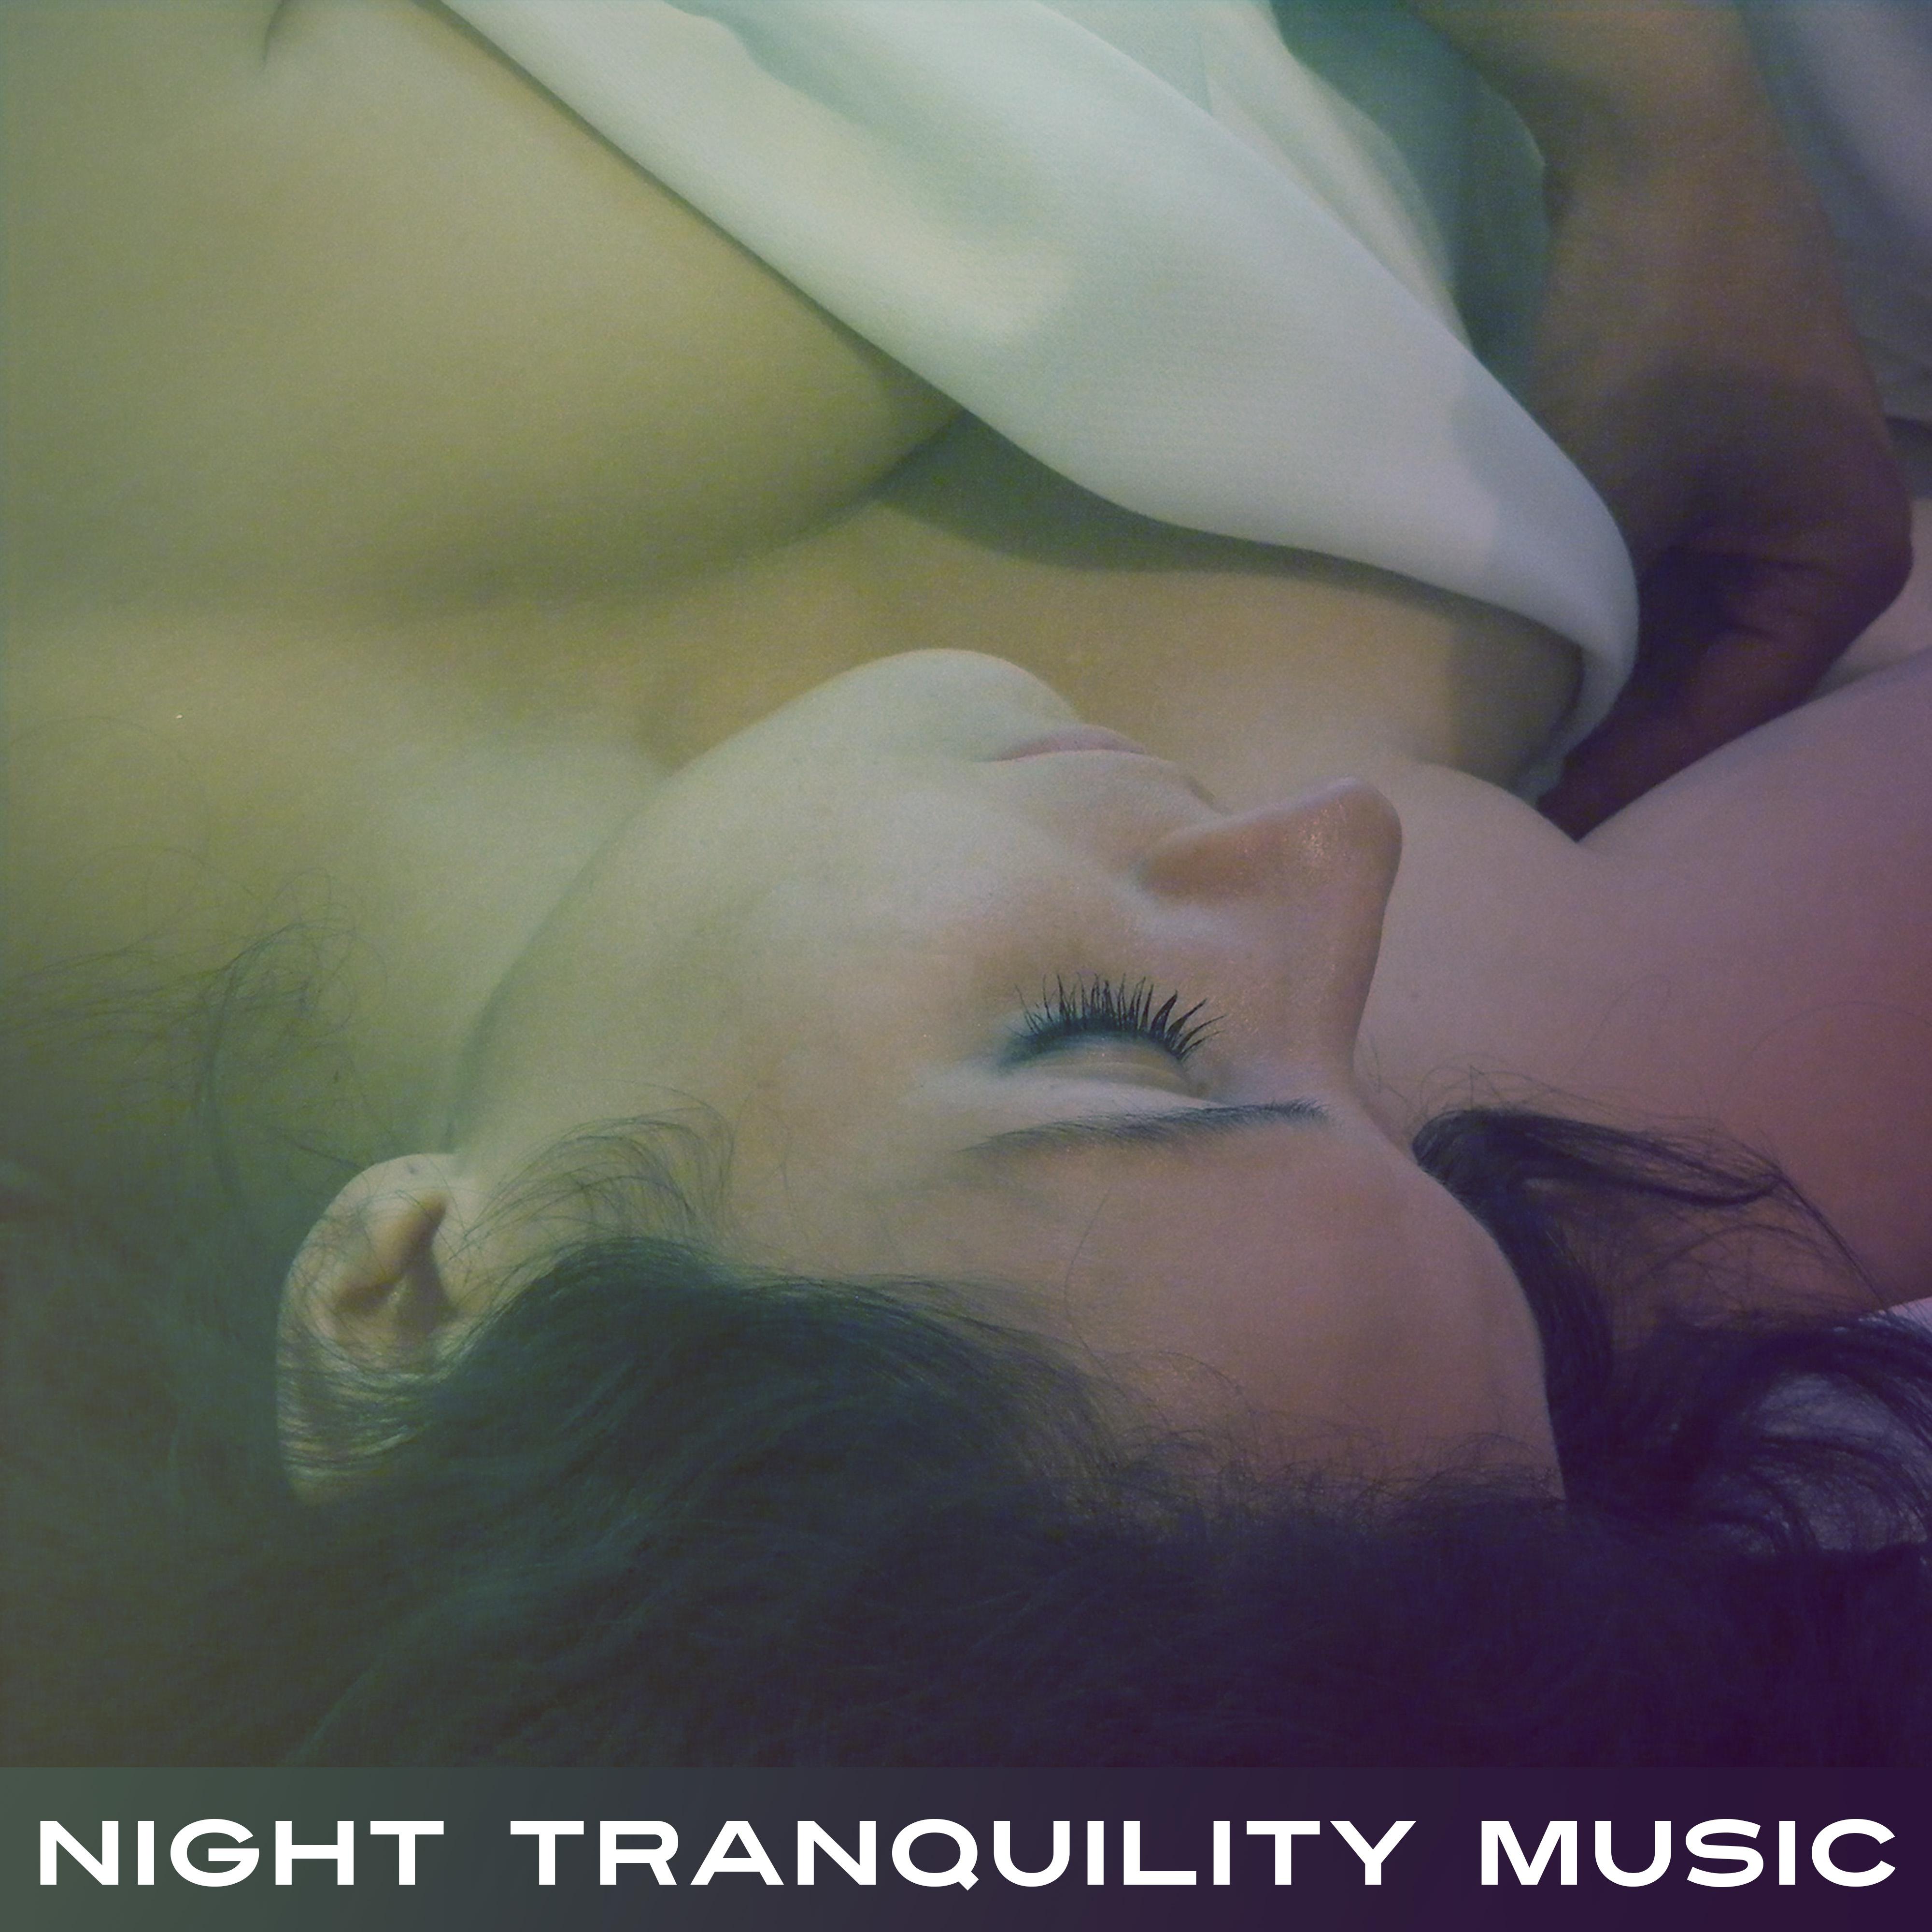 Night Tranquility Music  Calm Music for Sleeping, Sleep Well, New Age Ambient Dreaming